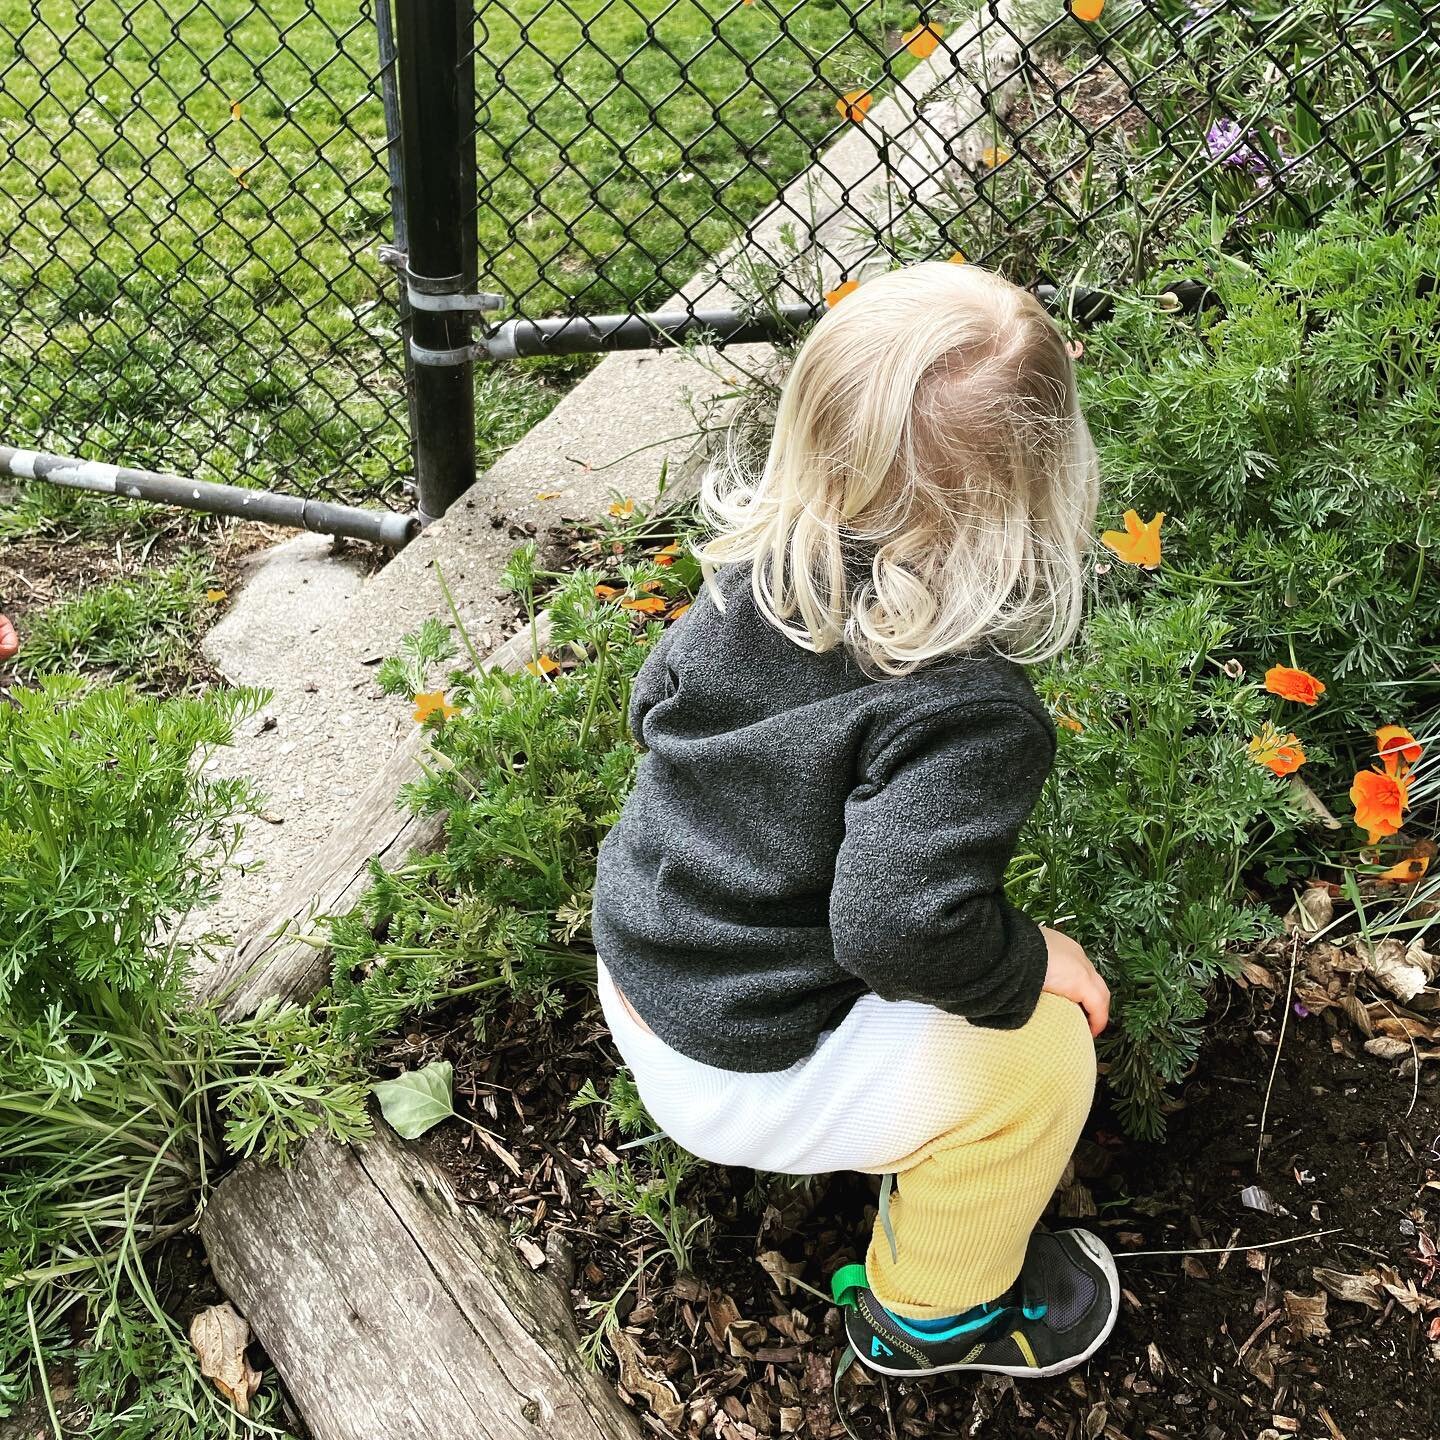 &ldquo;We discovered that education is not something which the teacher does, but that it is a natural process which develops spontaneously in the human being.&rdquo;
&ndash;  Dr. Maria Montessori

This 2-year-old child spent most of his outside time 